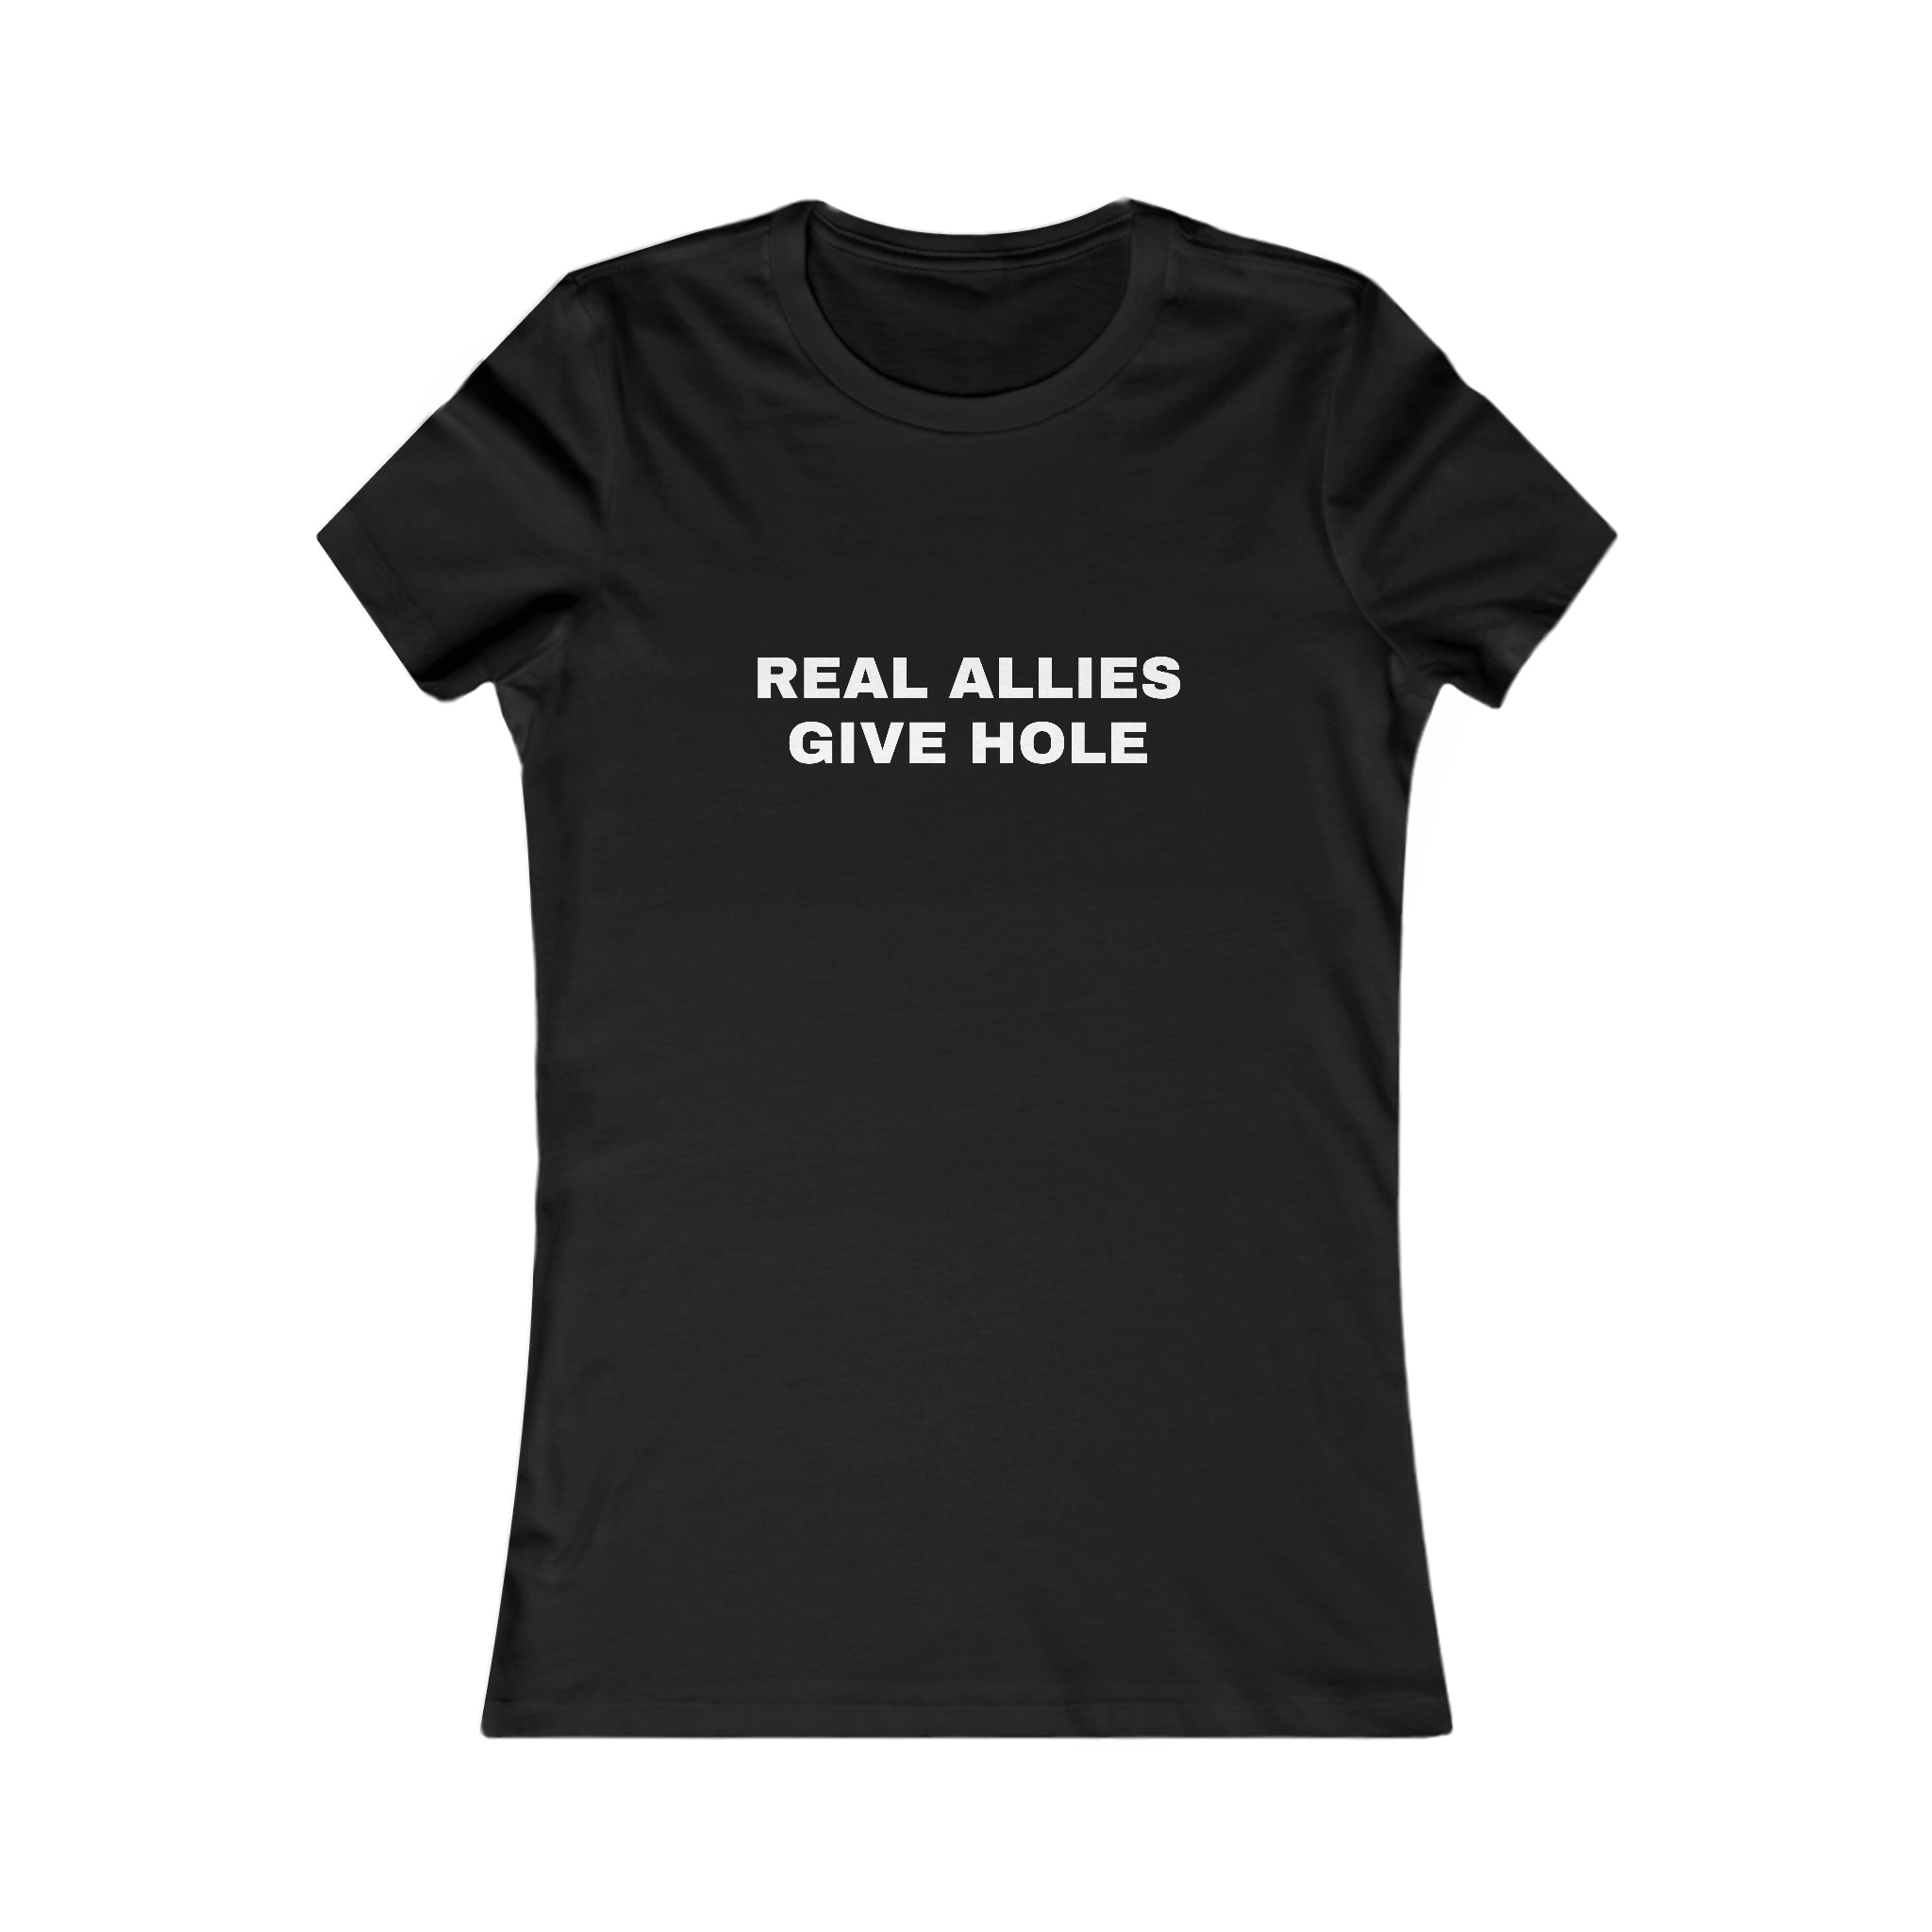 Shirt for Real Allies - Femme Fit